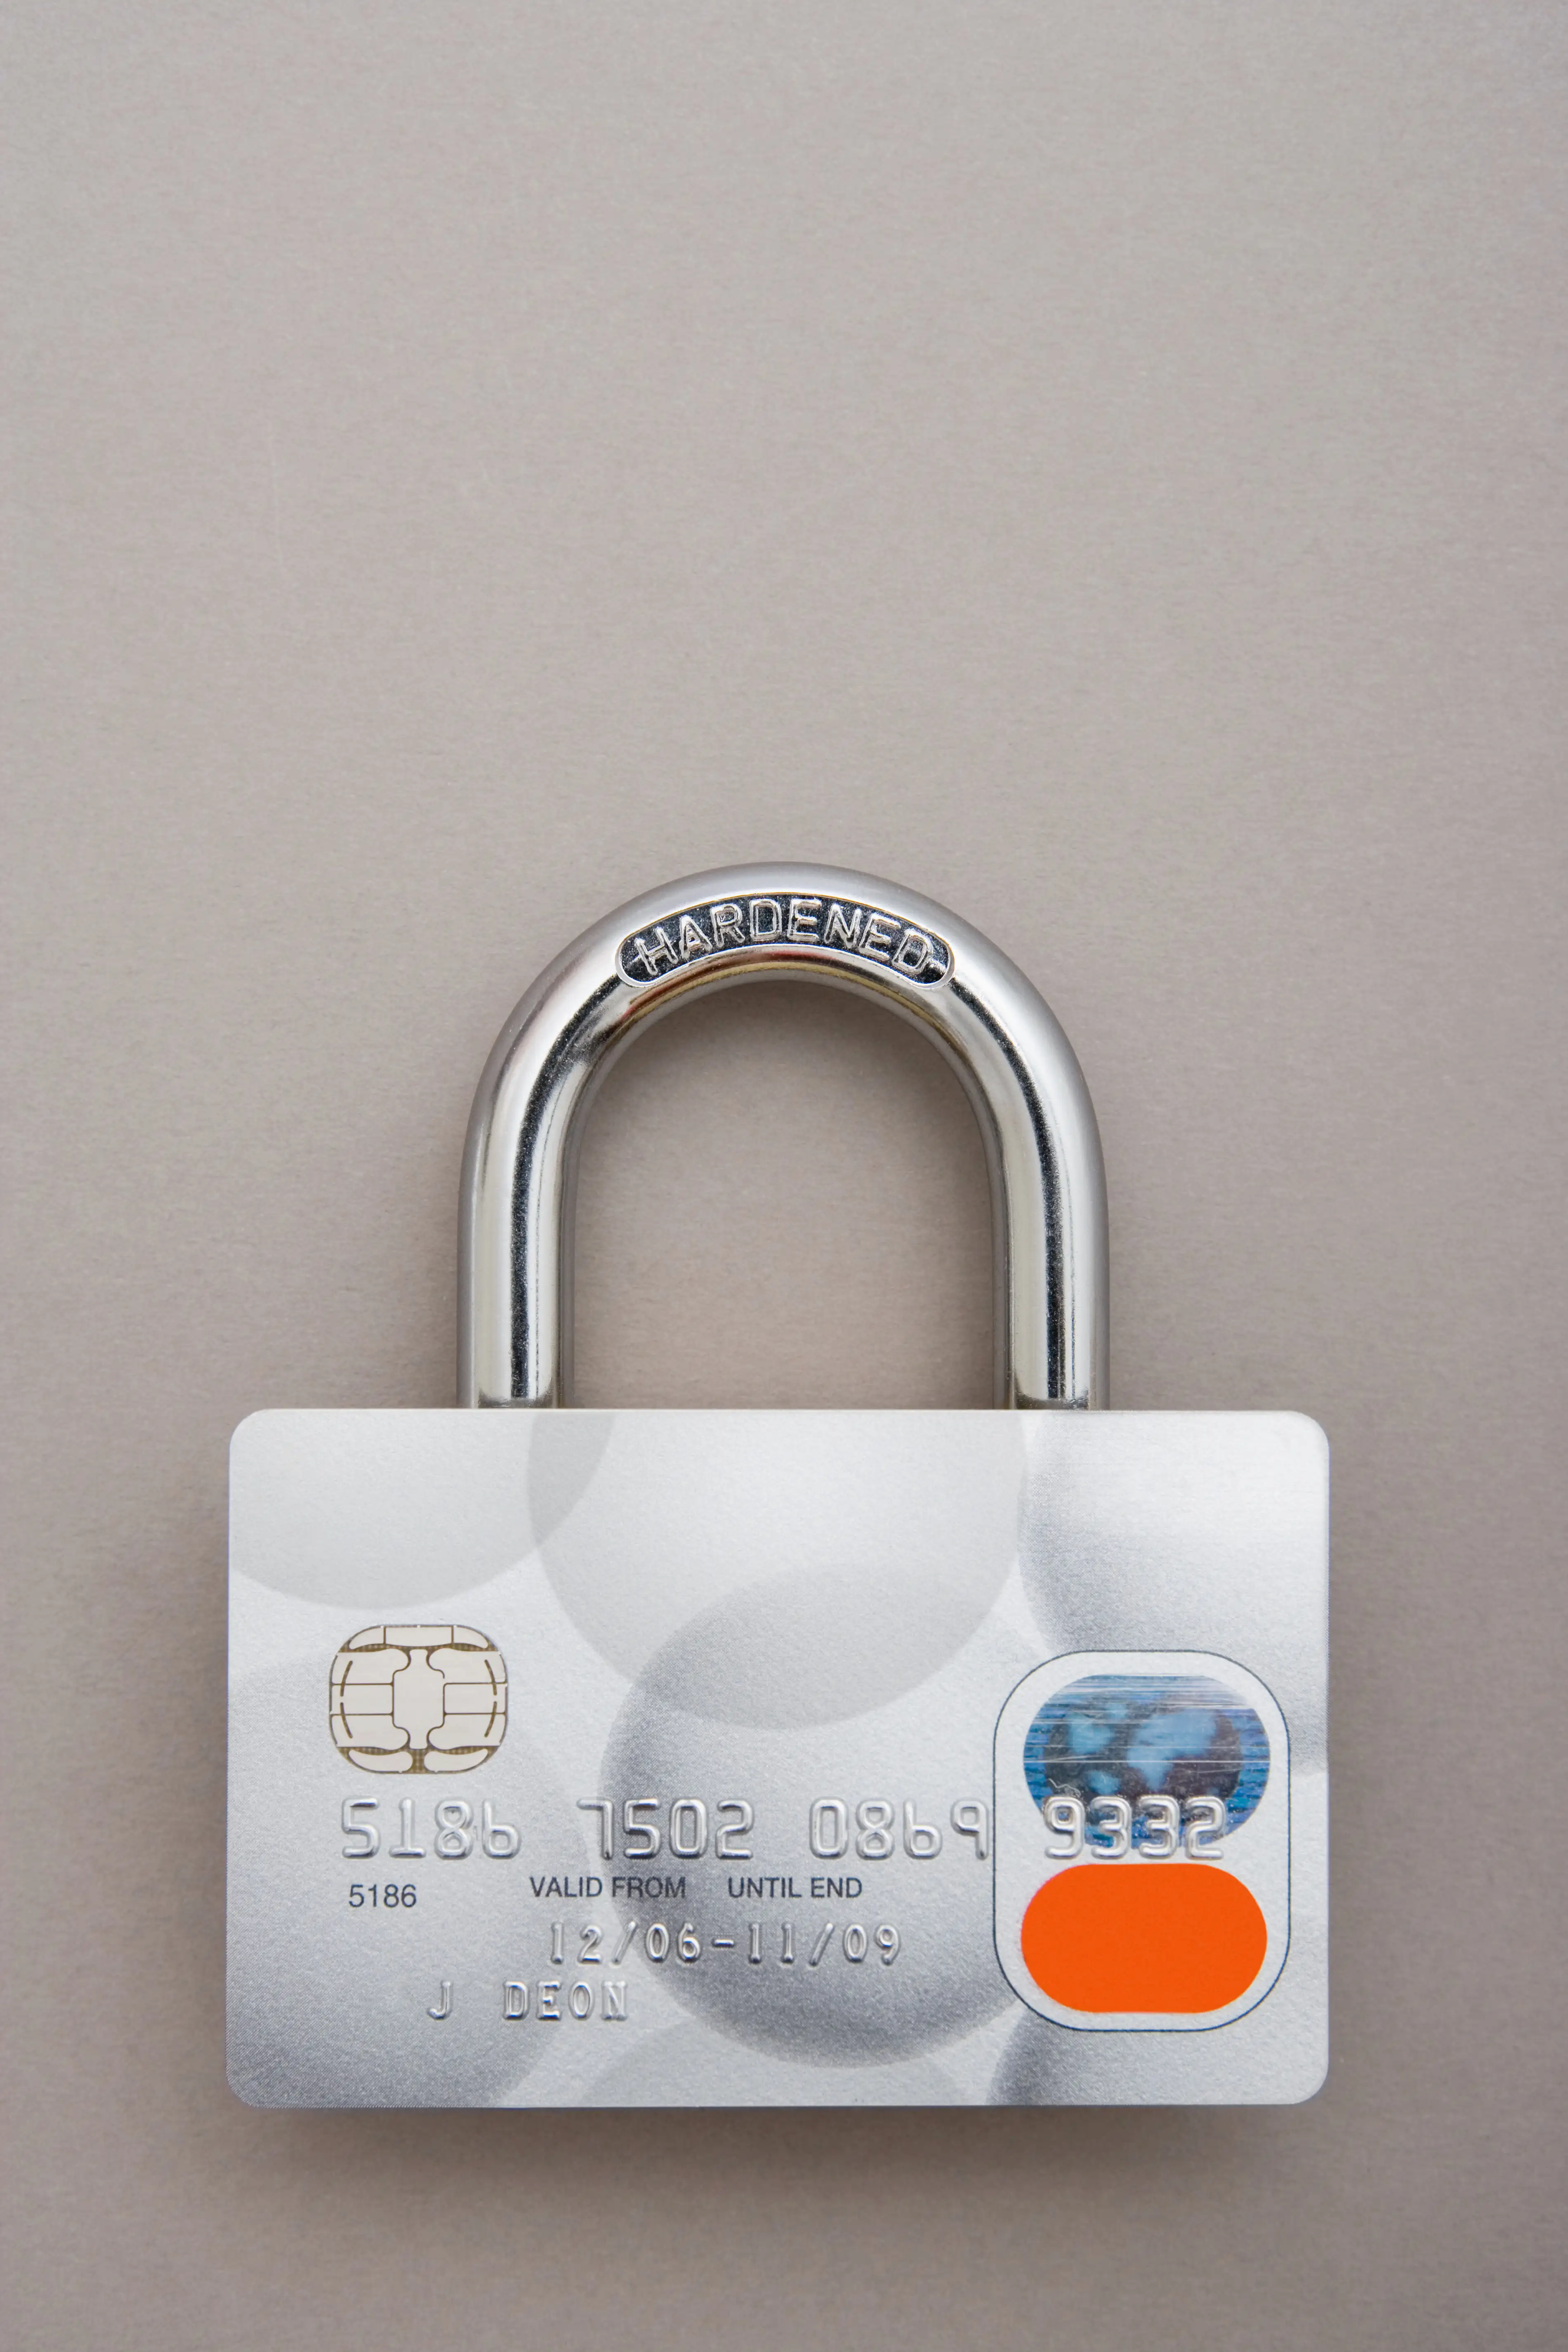 Chip and Pin credit card transformed into a lock